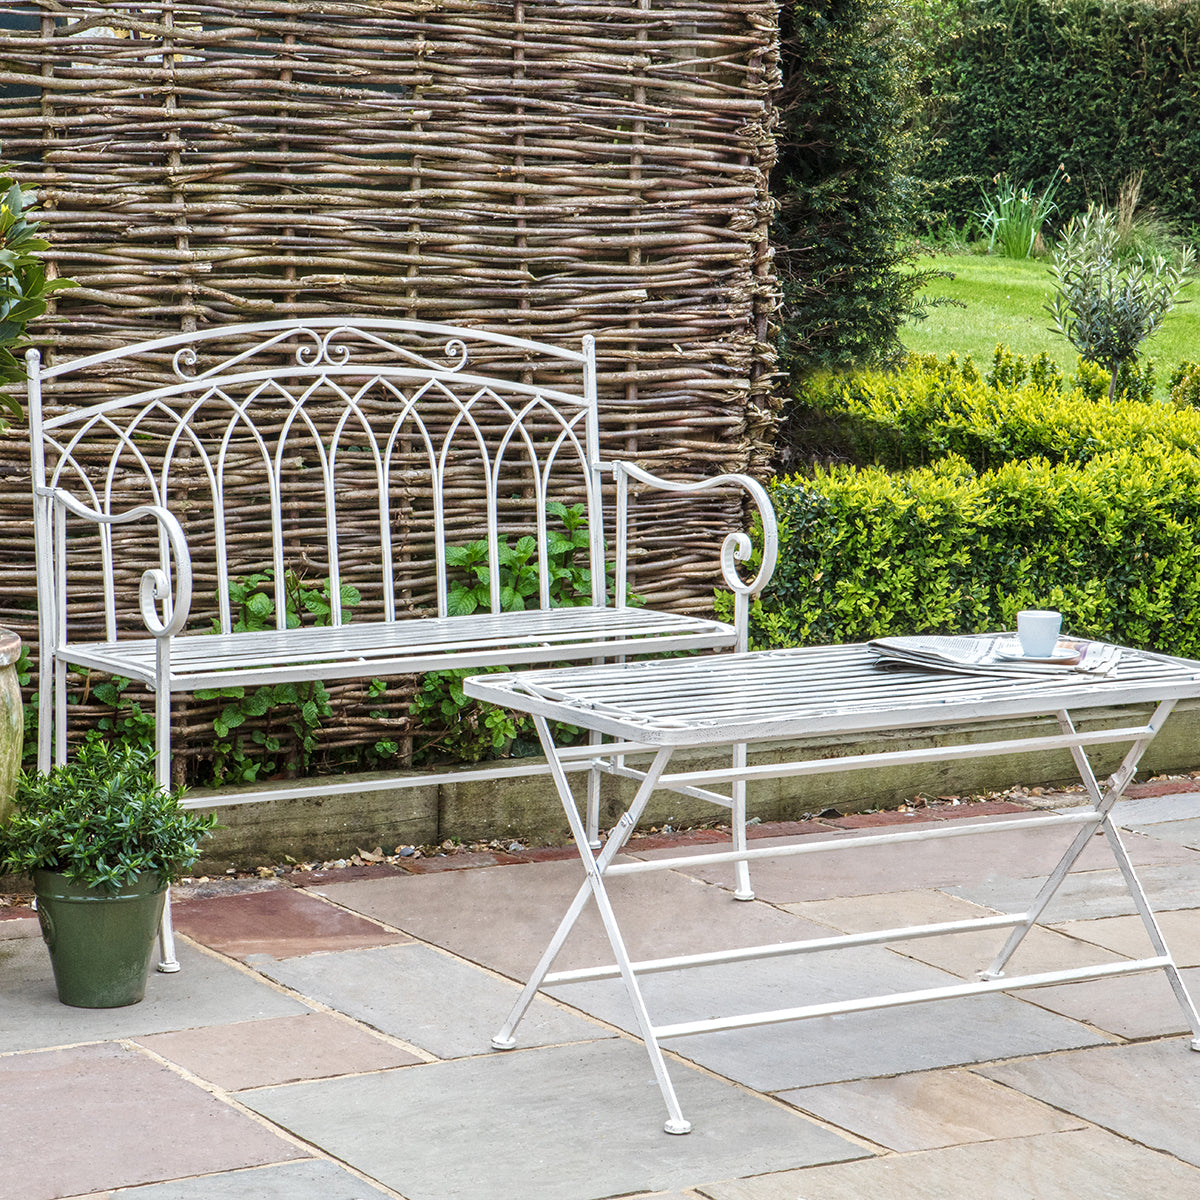 A Torrington Outdoor Coffee Table Gatehouse bench and table for interior decor and home furniture enthusiasts from Kikiathome.co.uk.